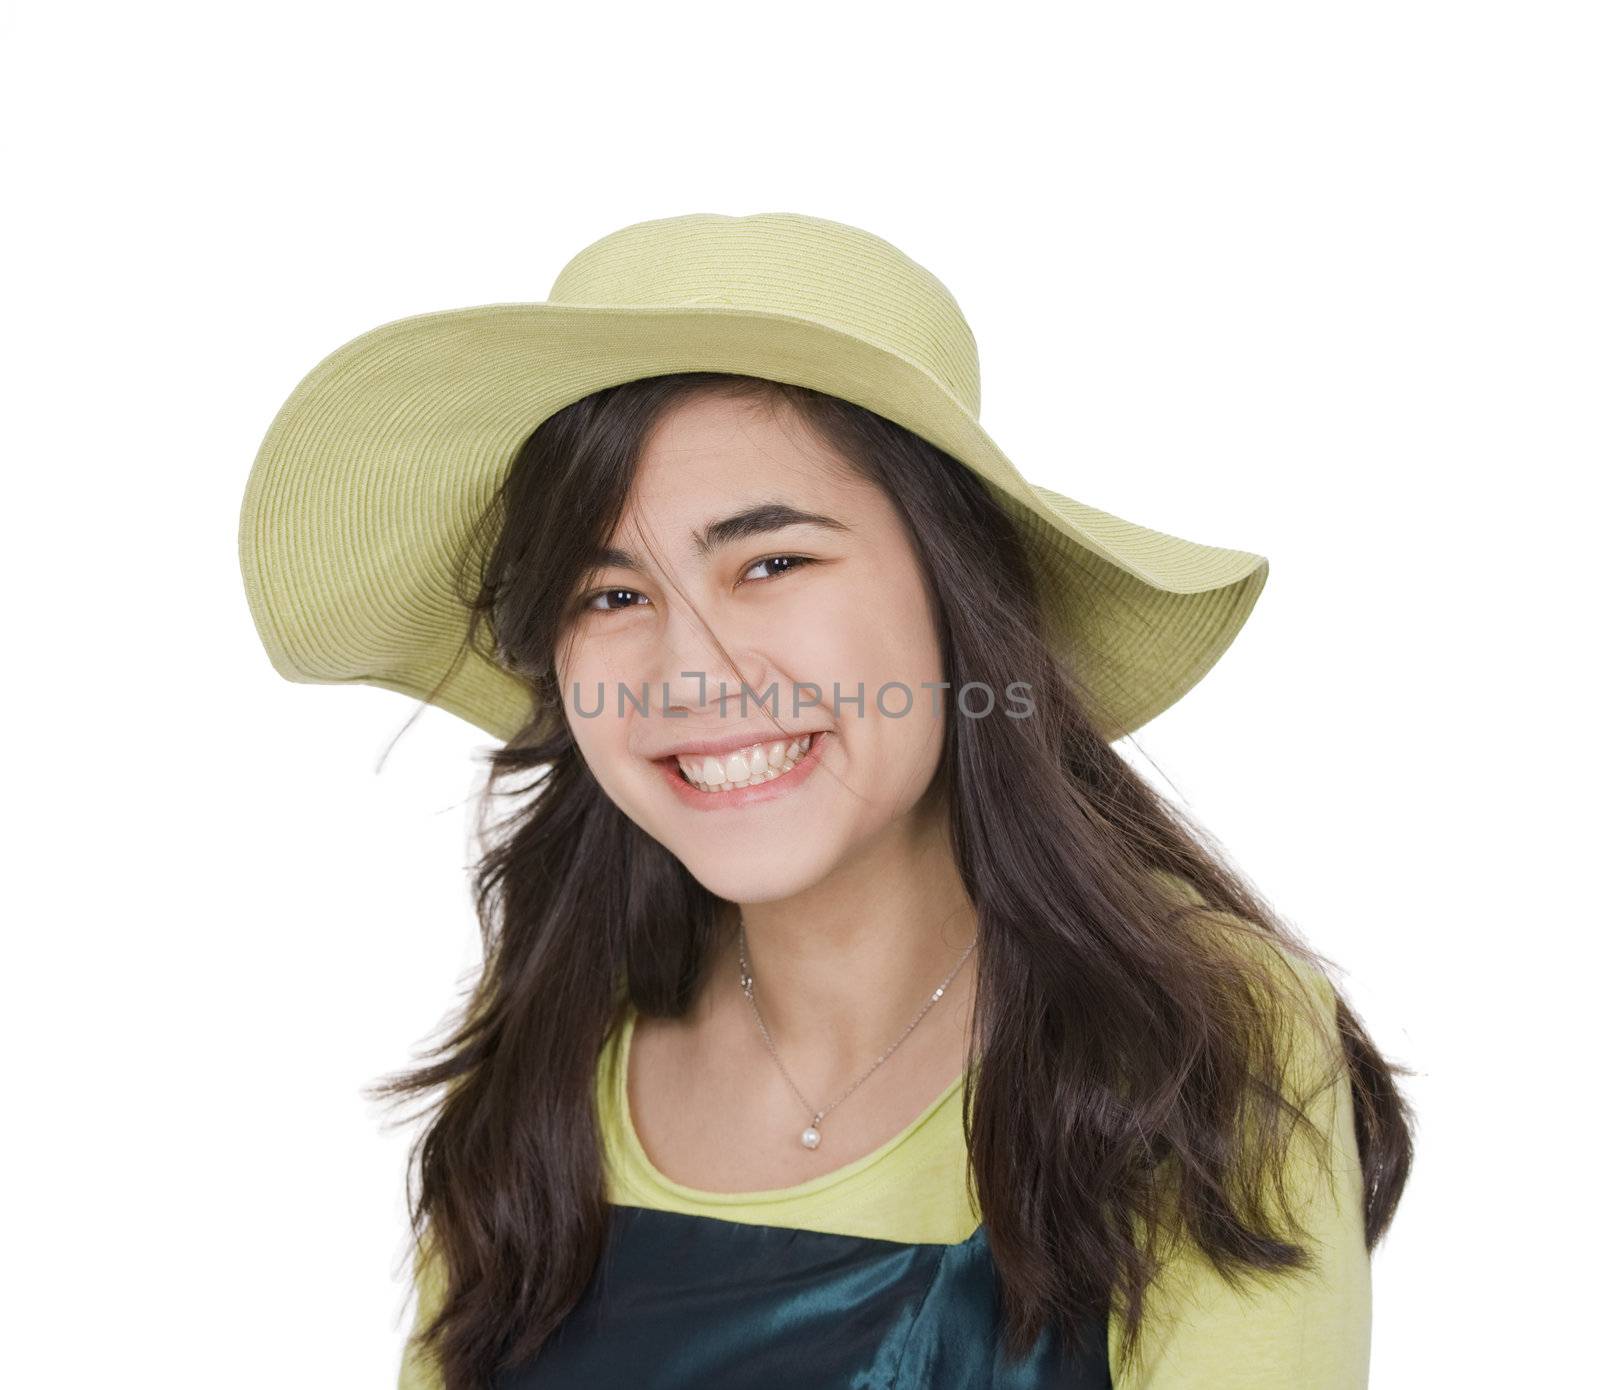 Smiling teen girl in green dress and lime green hat, by jarenwicklund